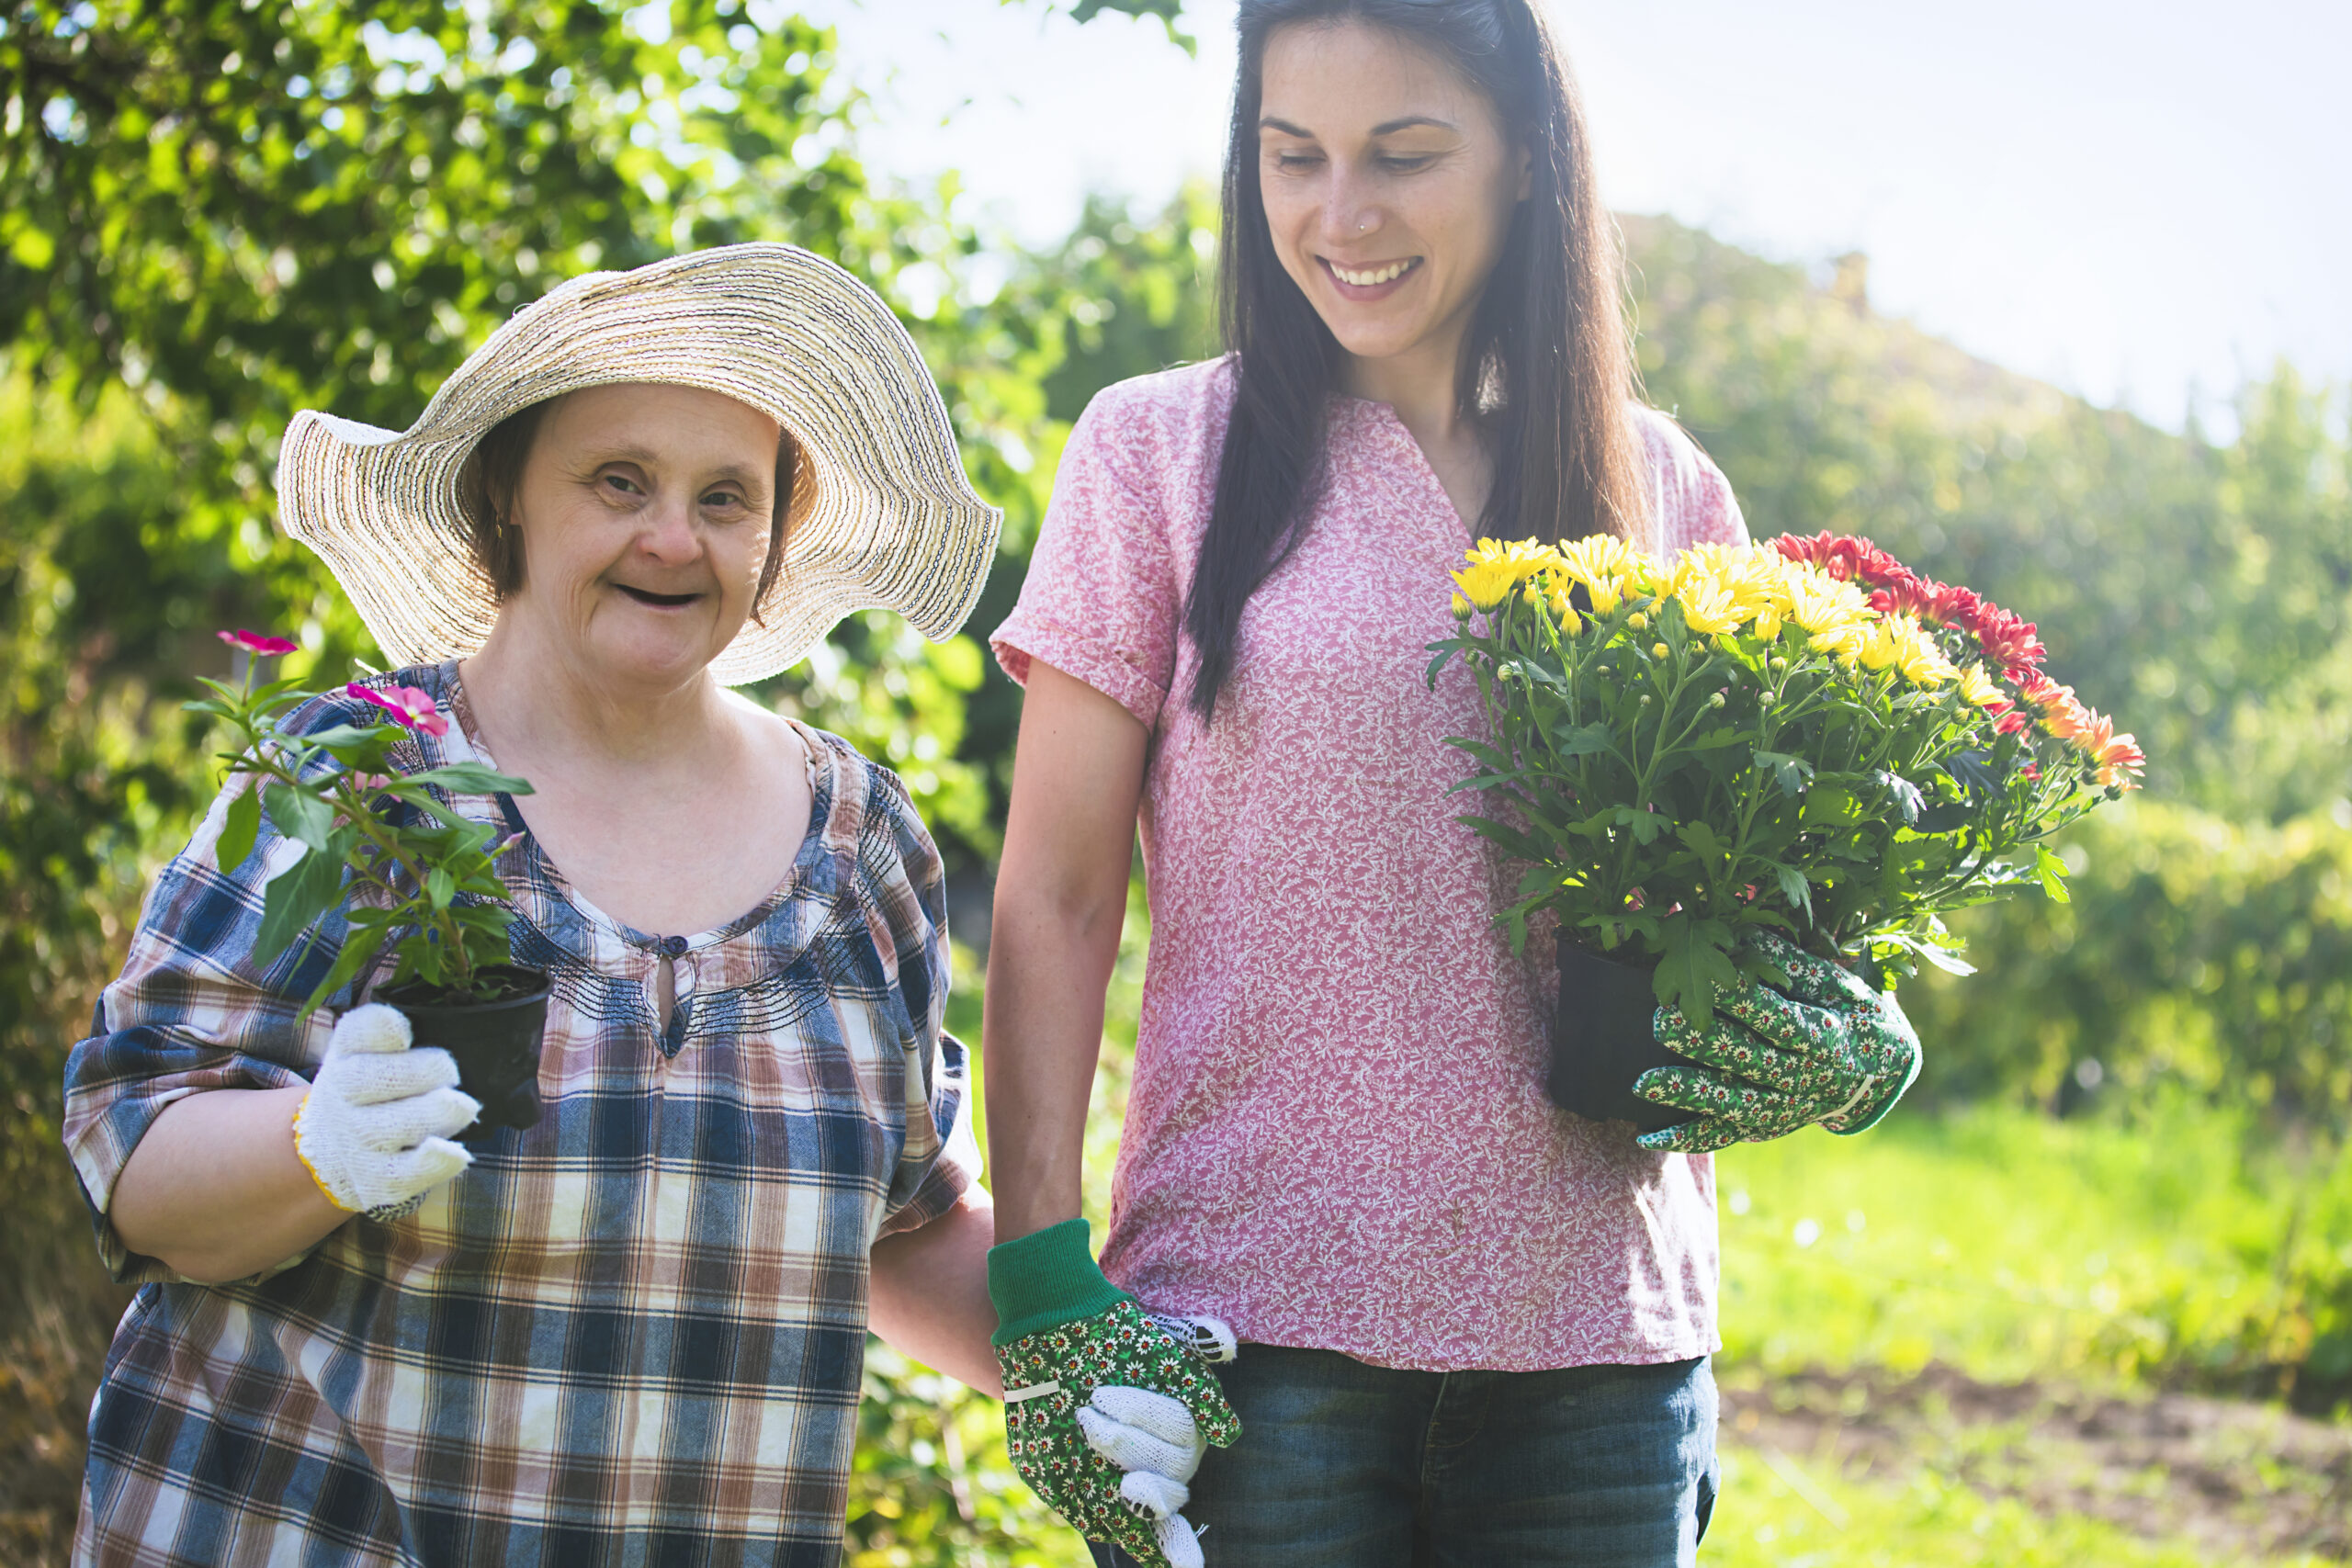 Person with intellectual or Developmental disability holding flowers in one hand and holding the hand of their caregiver with other hand